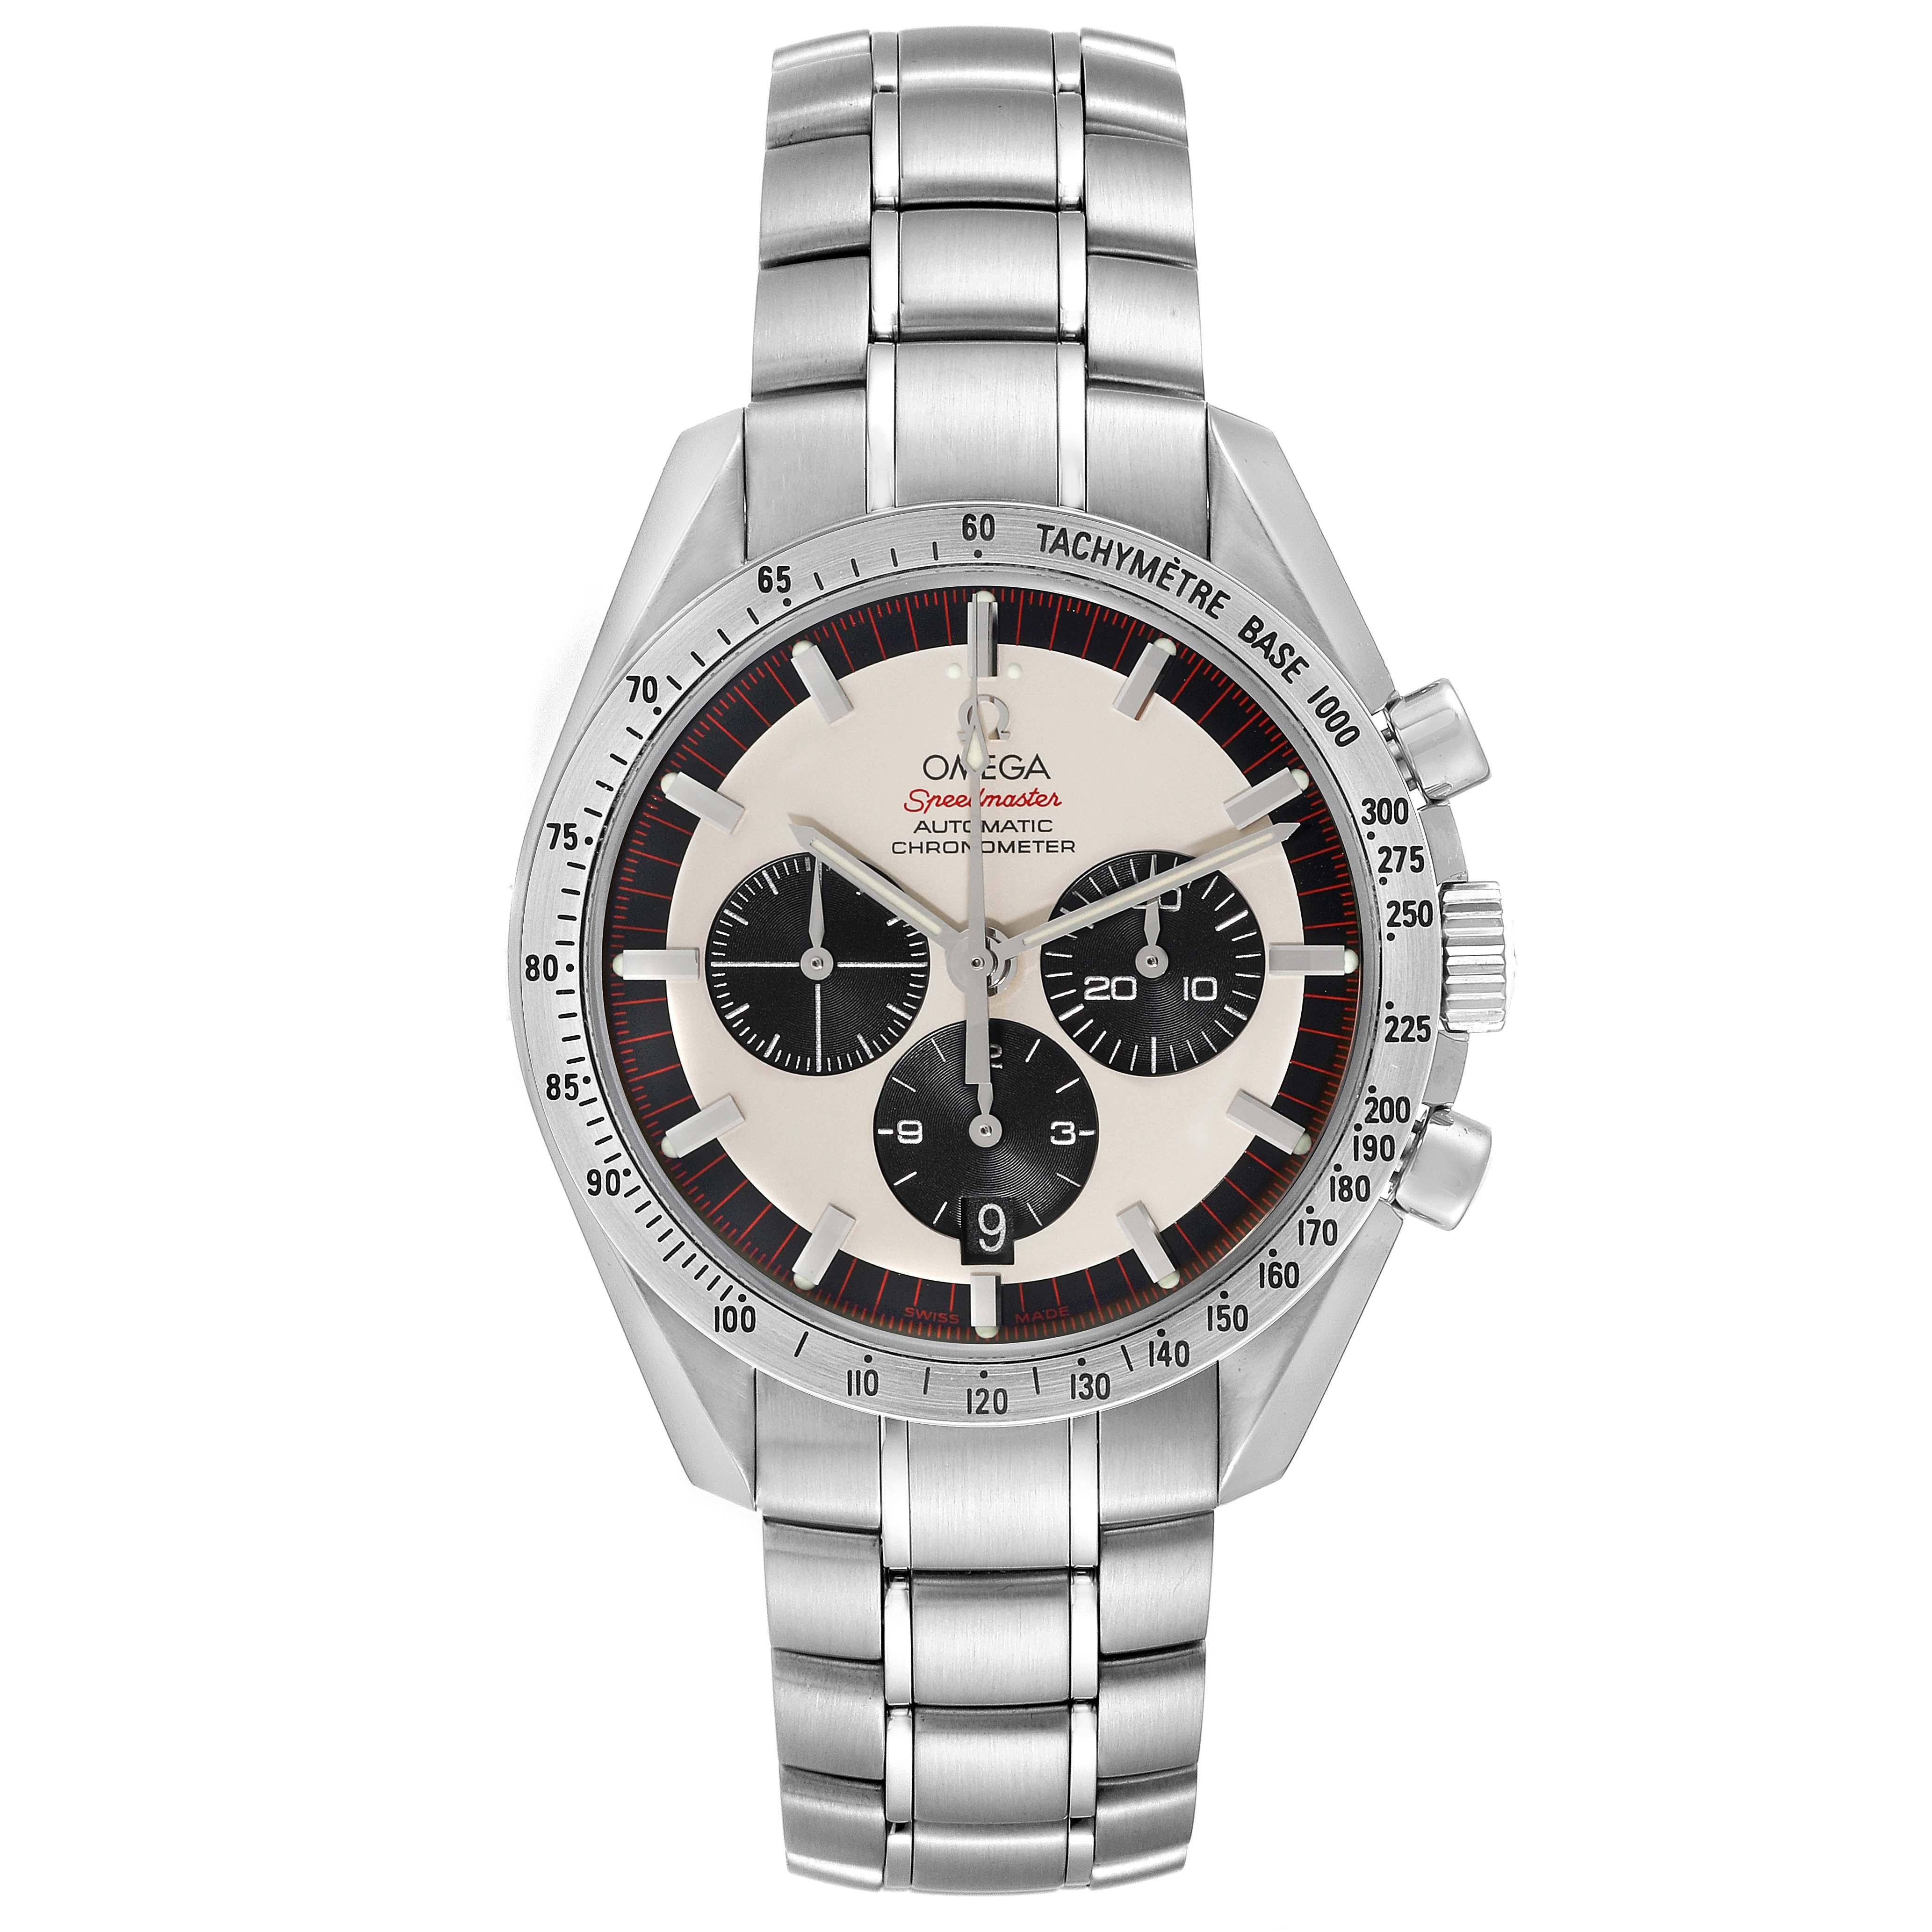 Omega Speedmaster Schumacher Limited Edition Steel Mens Watch 3559.32.00 Box Card. Officially certified chronometer automatic self-winding movement. Chronograph function. Stainless steel case 42.0 mm in diameter. Omega logo on the crown. 